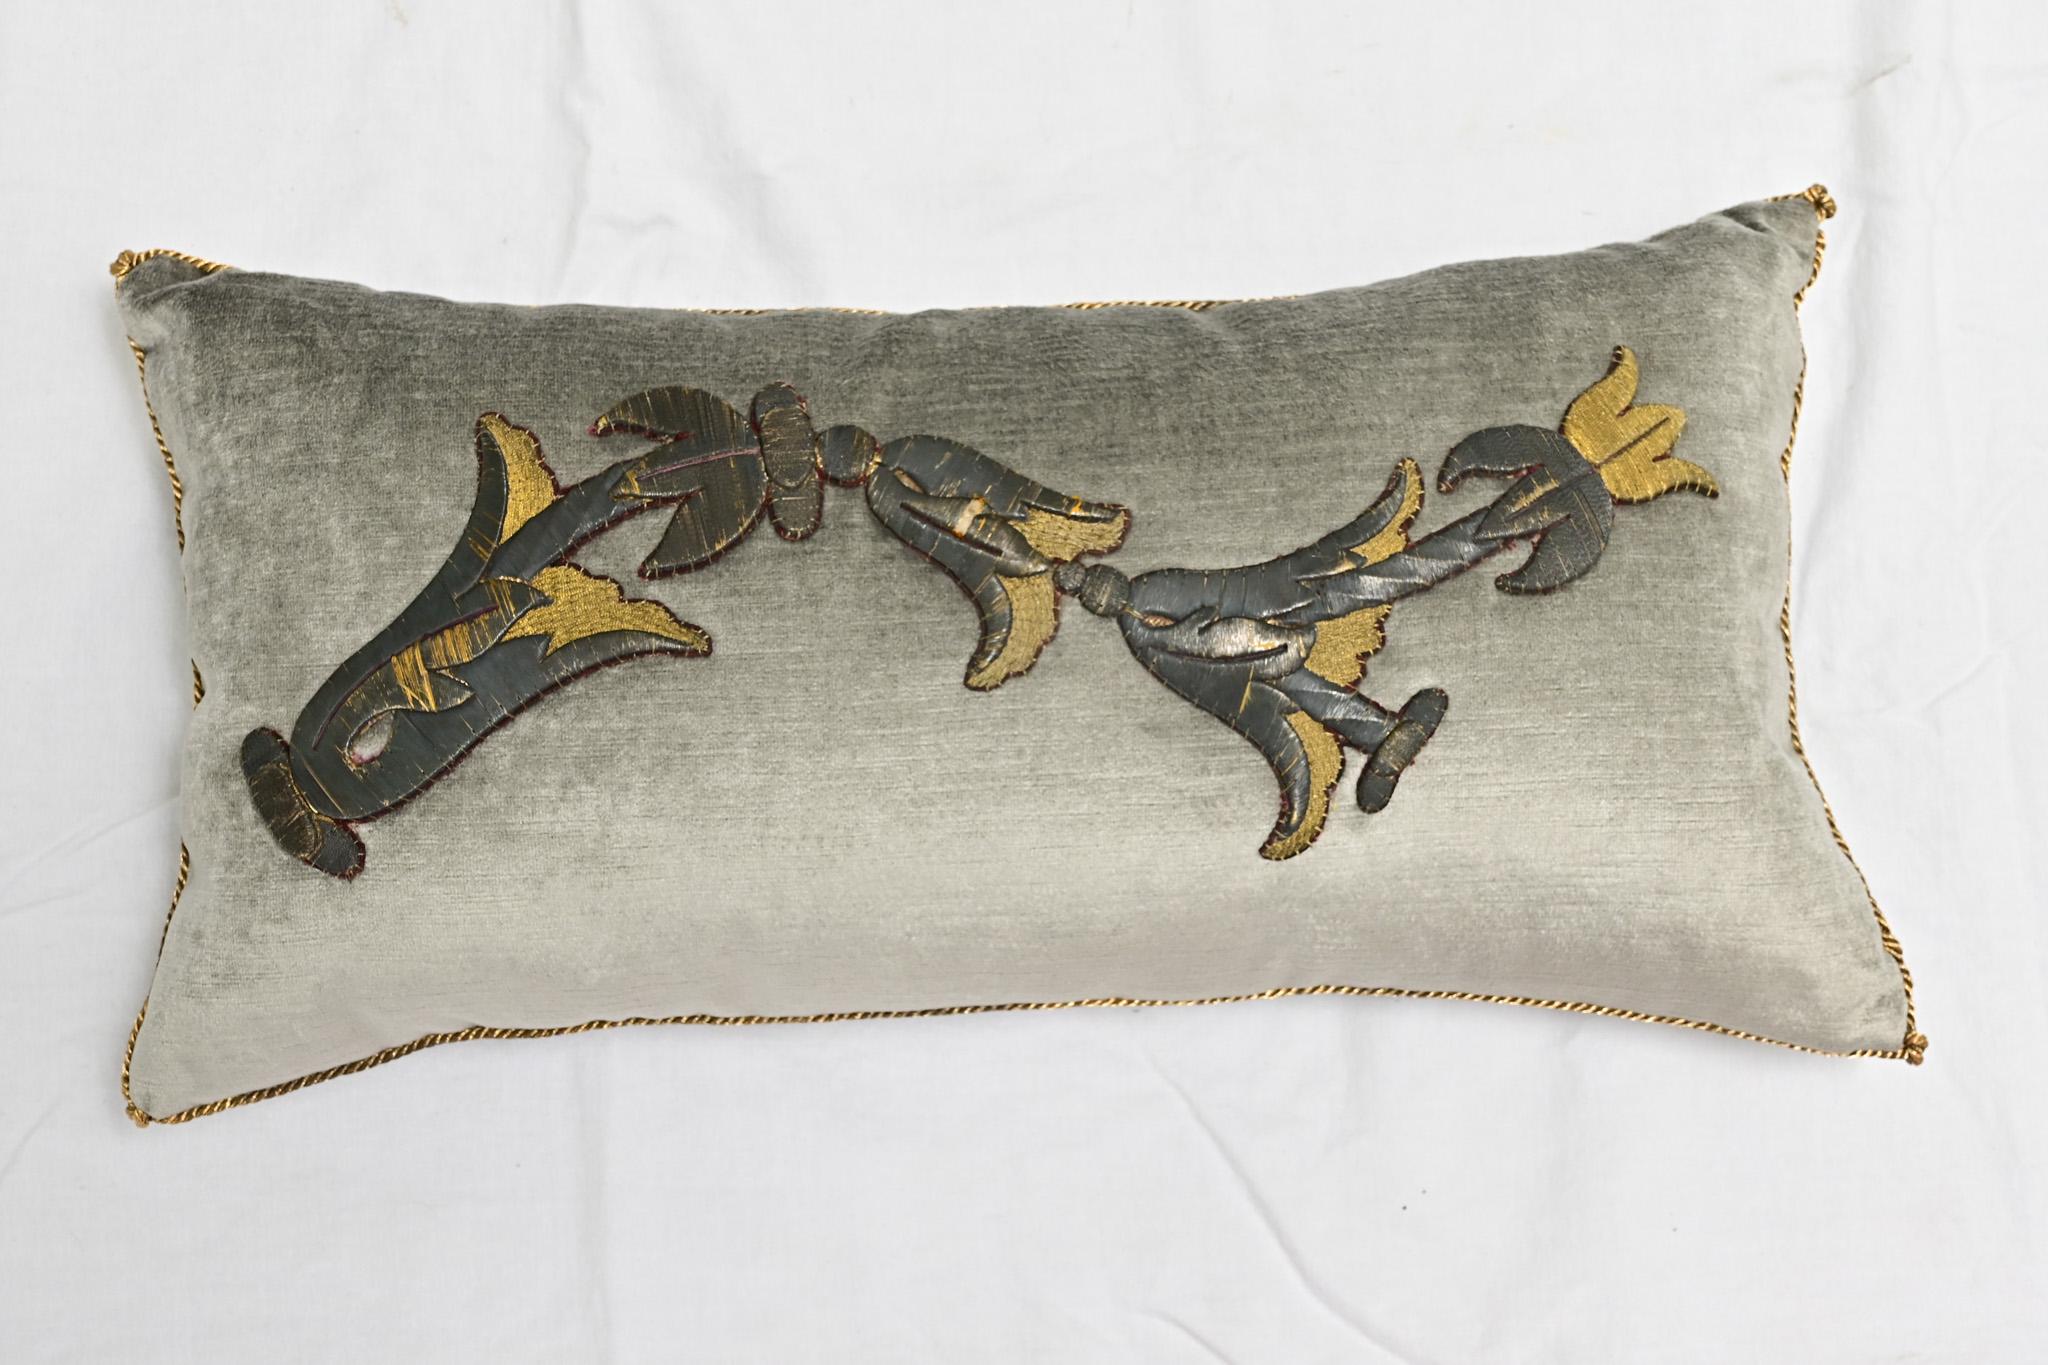 A beautiful single velvet pillow. Hand-trimmed and features vintage metallic gold cording, knotted in the corners. Designed by Rebecca Vizard for B. Viz Design, this down filled pillow has thickly raised, antique European dark bronze and gold